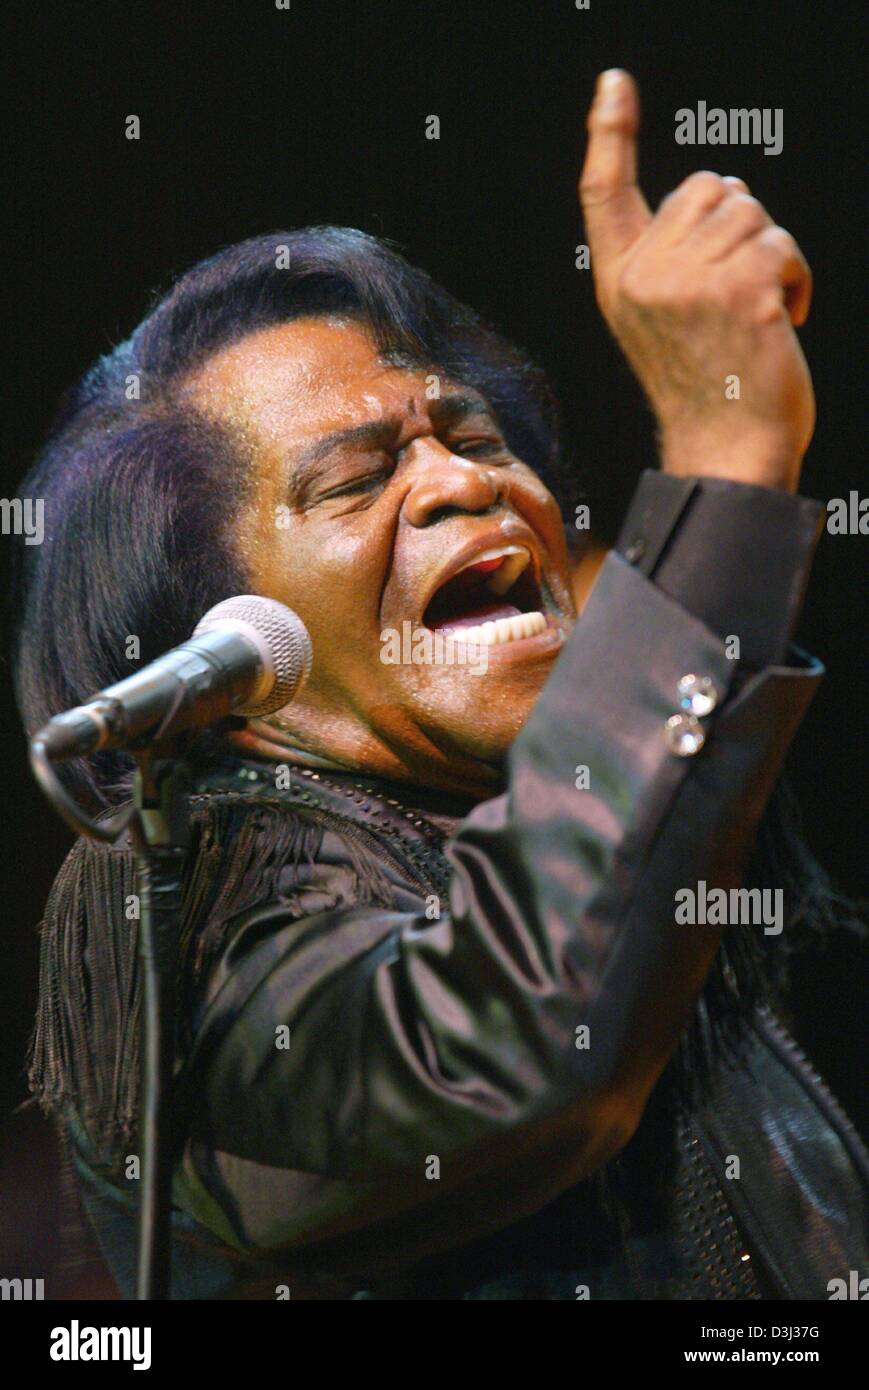 (dpa files) - US soul singer James Brown performs during his concert in Cologne, Germany, 28 November 2003. James Brown, the 'Godfather of Soul', was released from jail Thursday, 29 January 2004, a day after his arrest for shoving his wife to the ground. At a court hearing in the U.S. state of South Carolina, Brown, 70, denied he assaulted his spouse, Tomi Rae Brown, 33, during an  Stock Photo